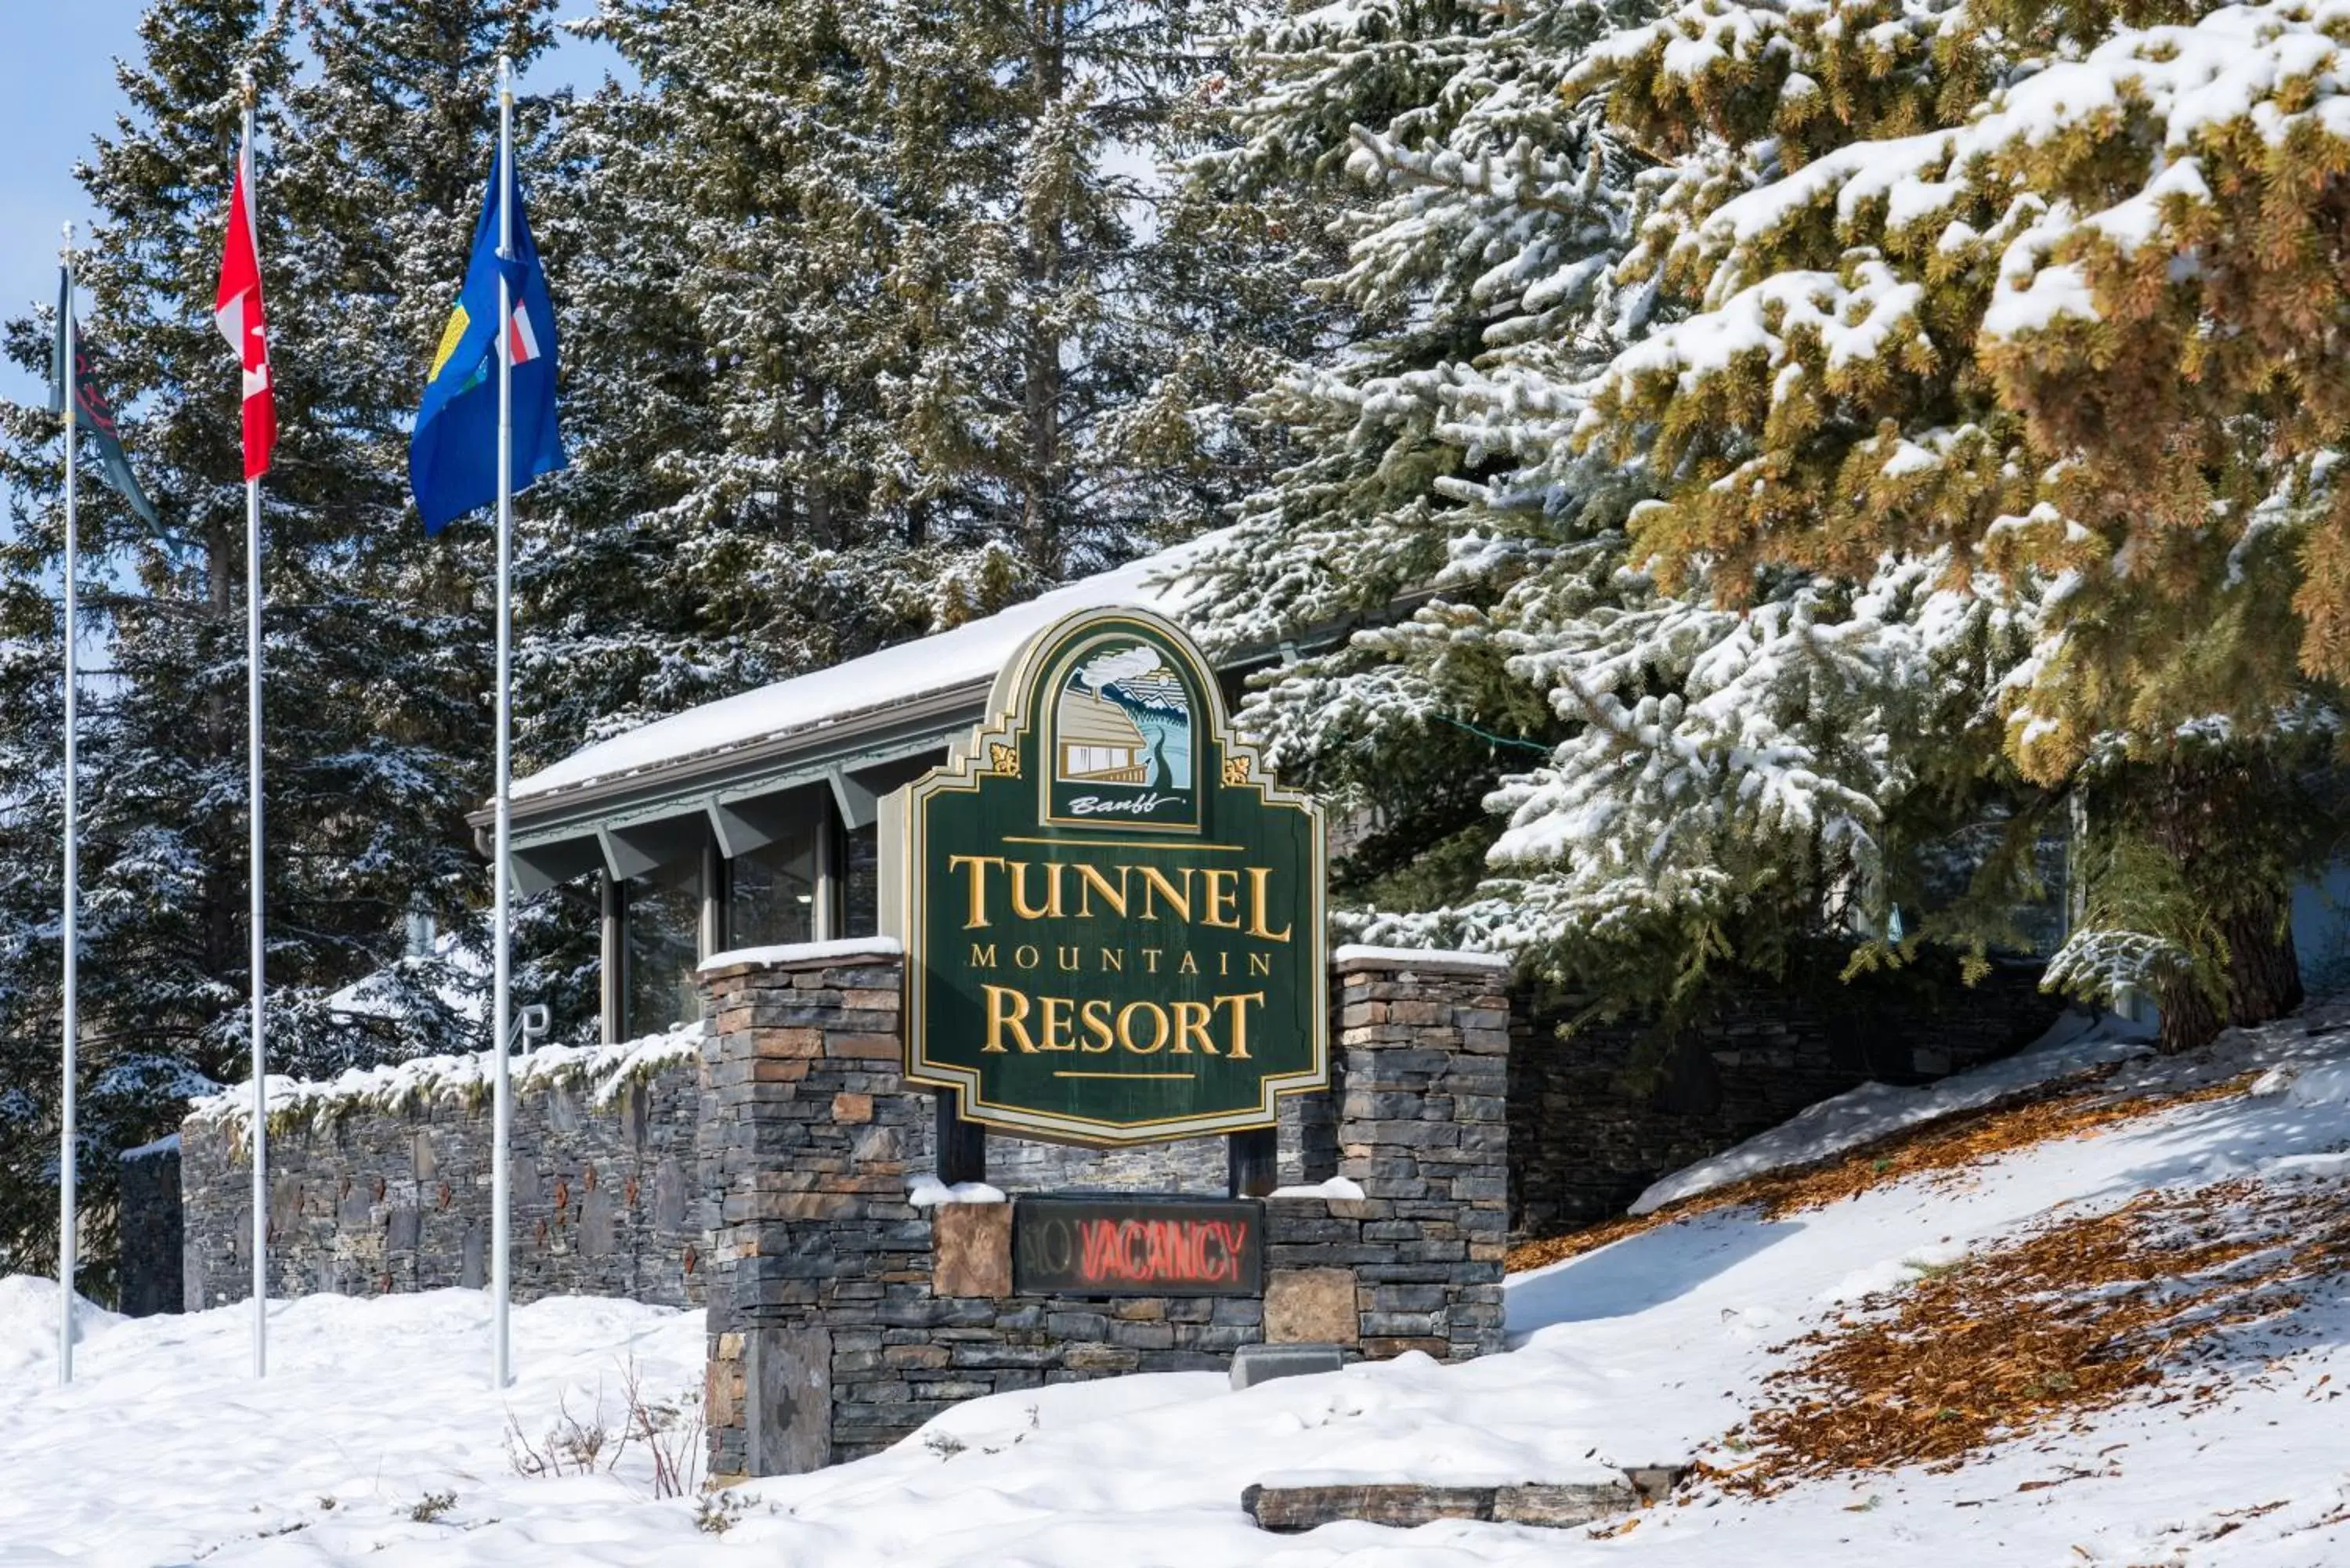 Property building, Winter in Tunnel Mountain Resort